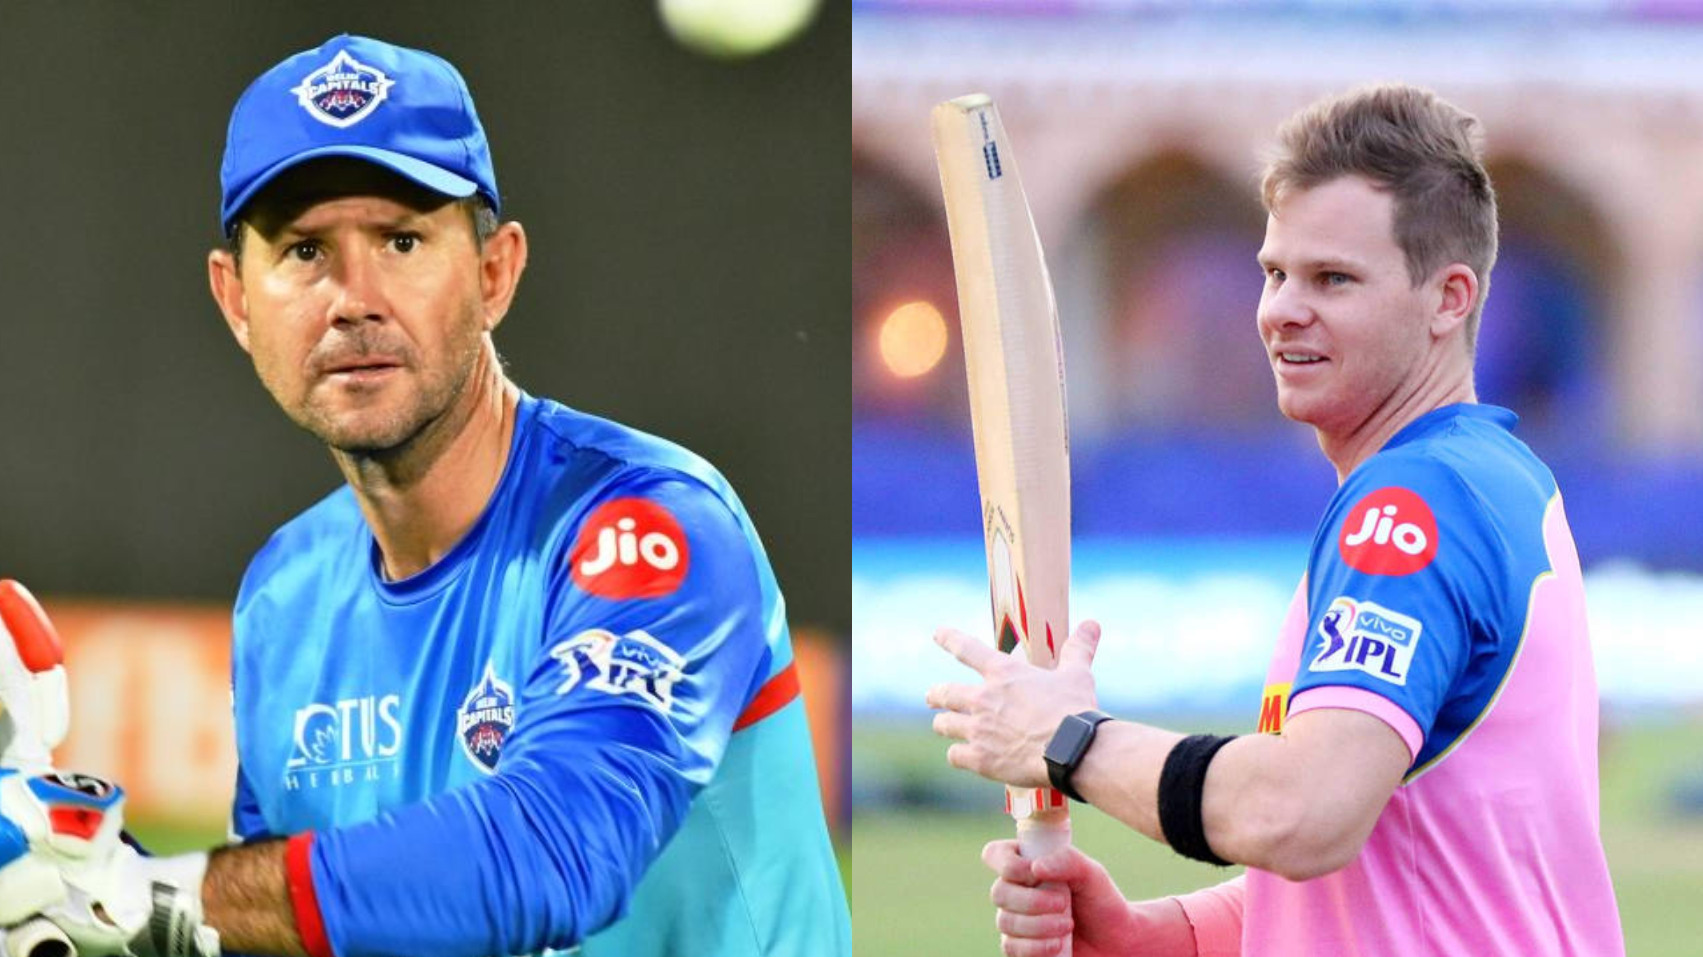 IPL 2021: Steve Smith was a remarkable steal for us, says DC coach Ricky Ponting; reveals his batting position